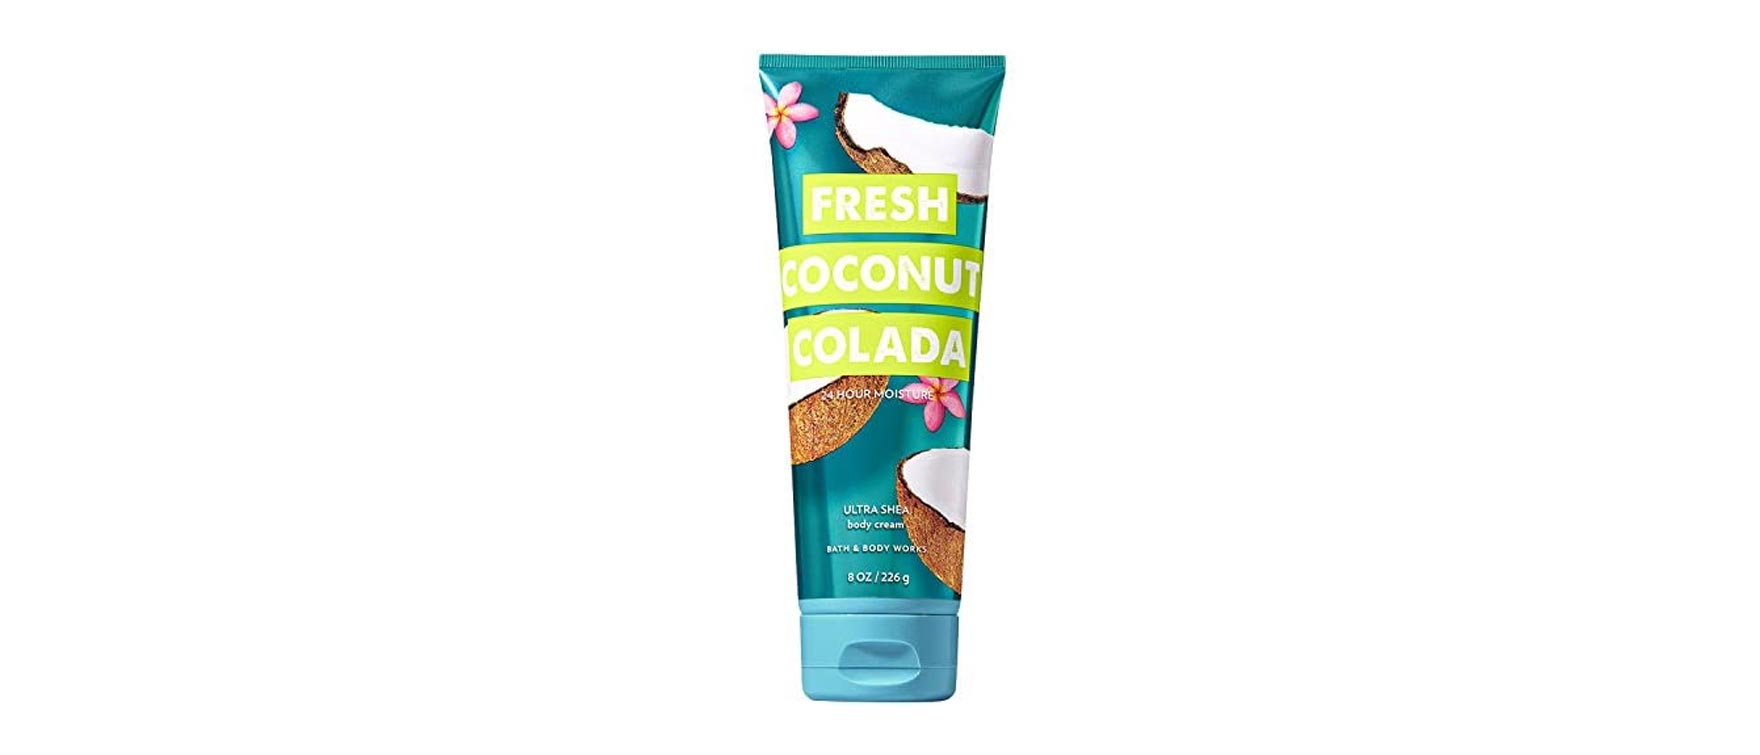 5. Best Smell Runner Up: Bath and Body Works Fresh Coconut Colada Ultra Shea Body Cream